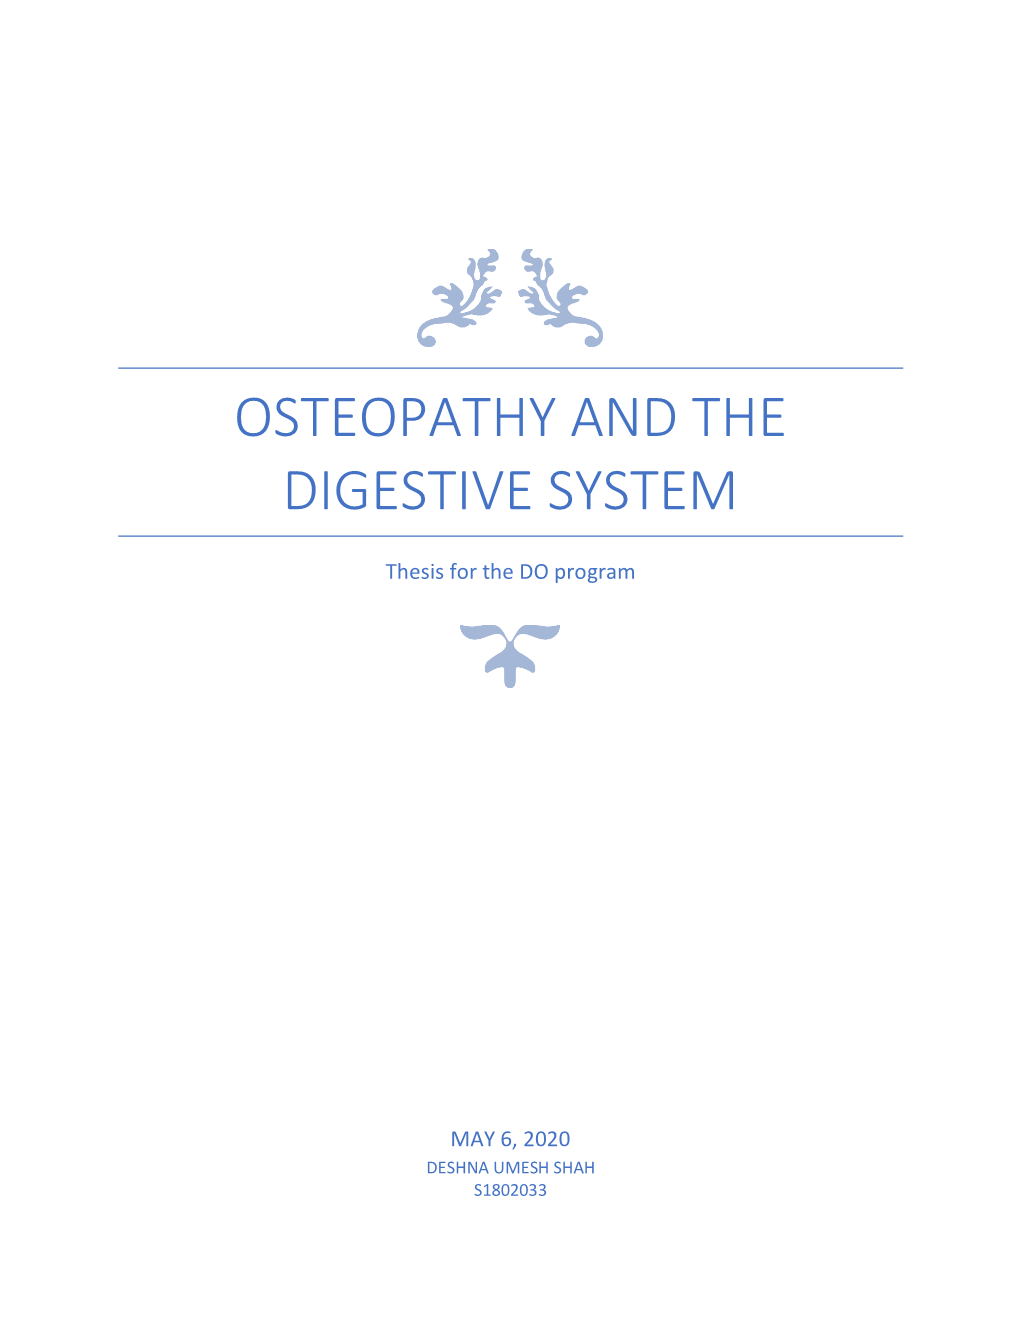 Osteopathy and the Digestive System